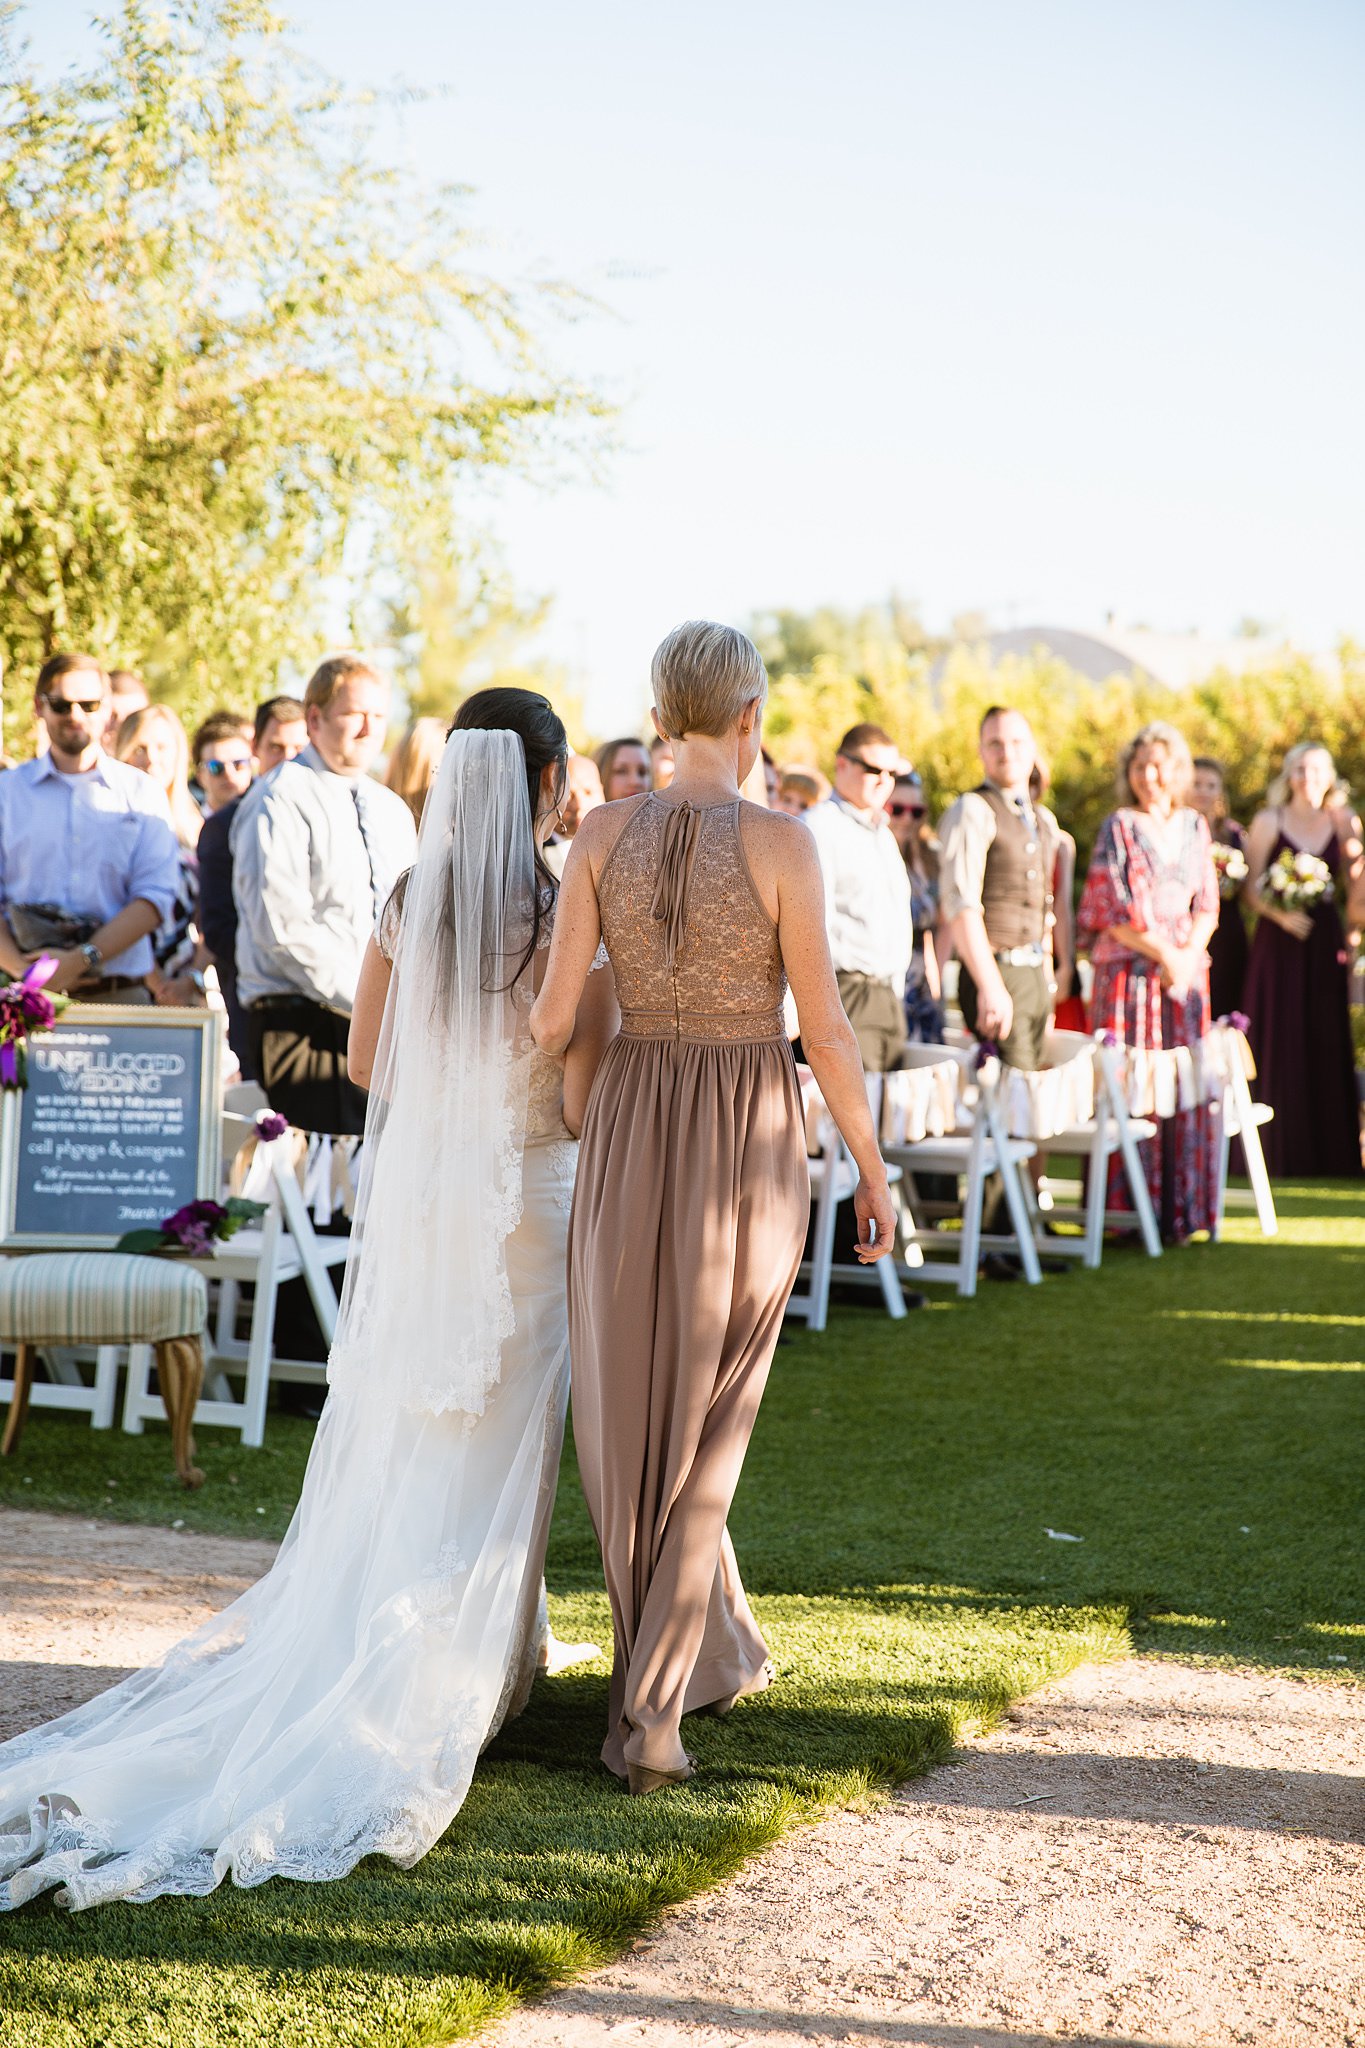 Bride and mother walking down the aisle at the Farmhouse at Schenpf Farms by Phoenix wedding photographer PMA Photography.